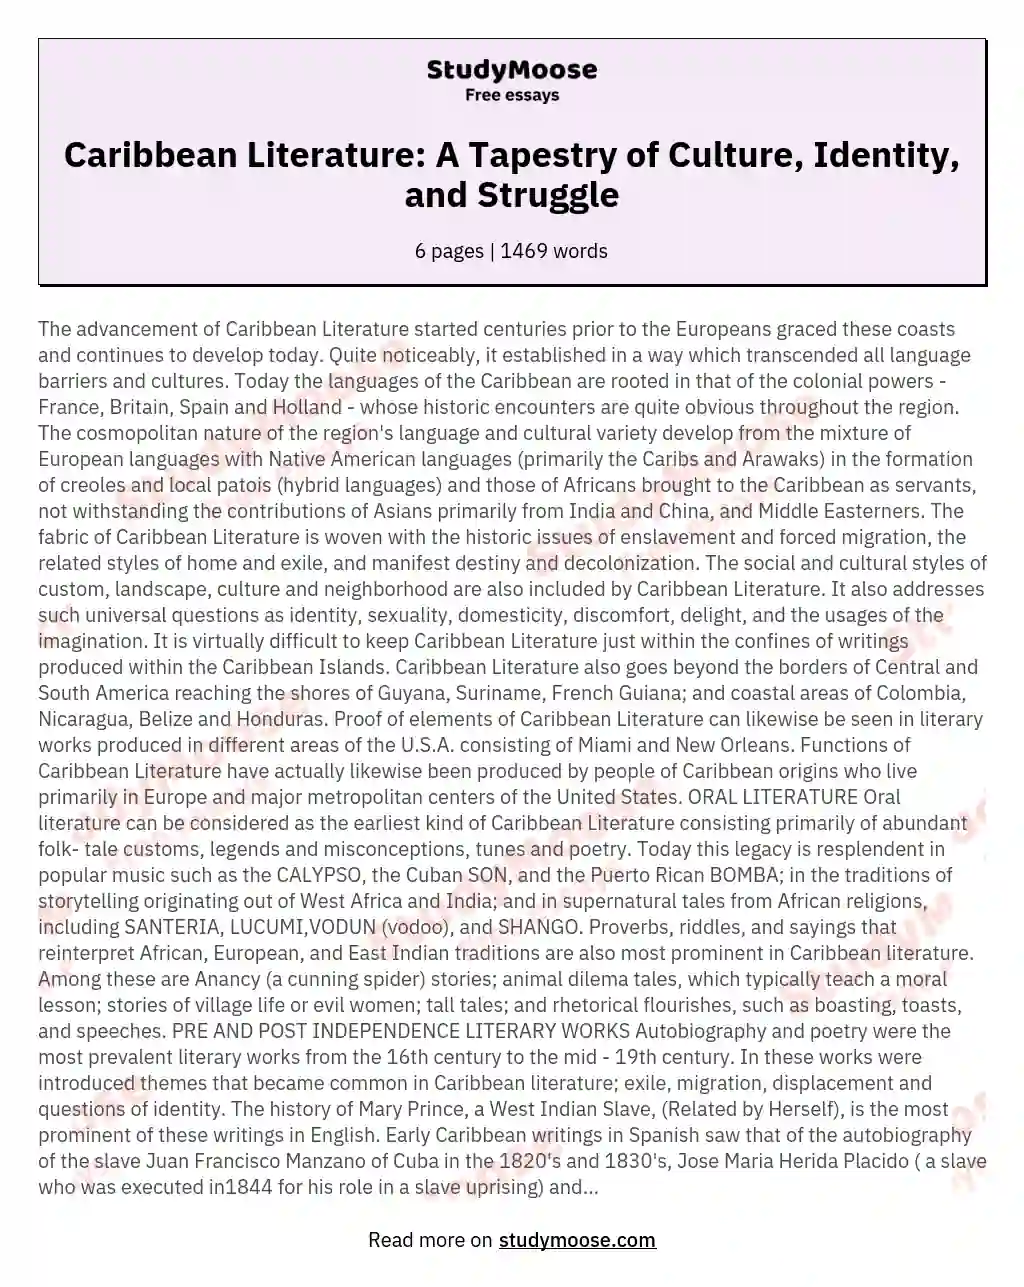 Caribbean Literature: A Tapestry of Culture, Identity, and Struggle essay